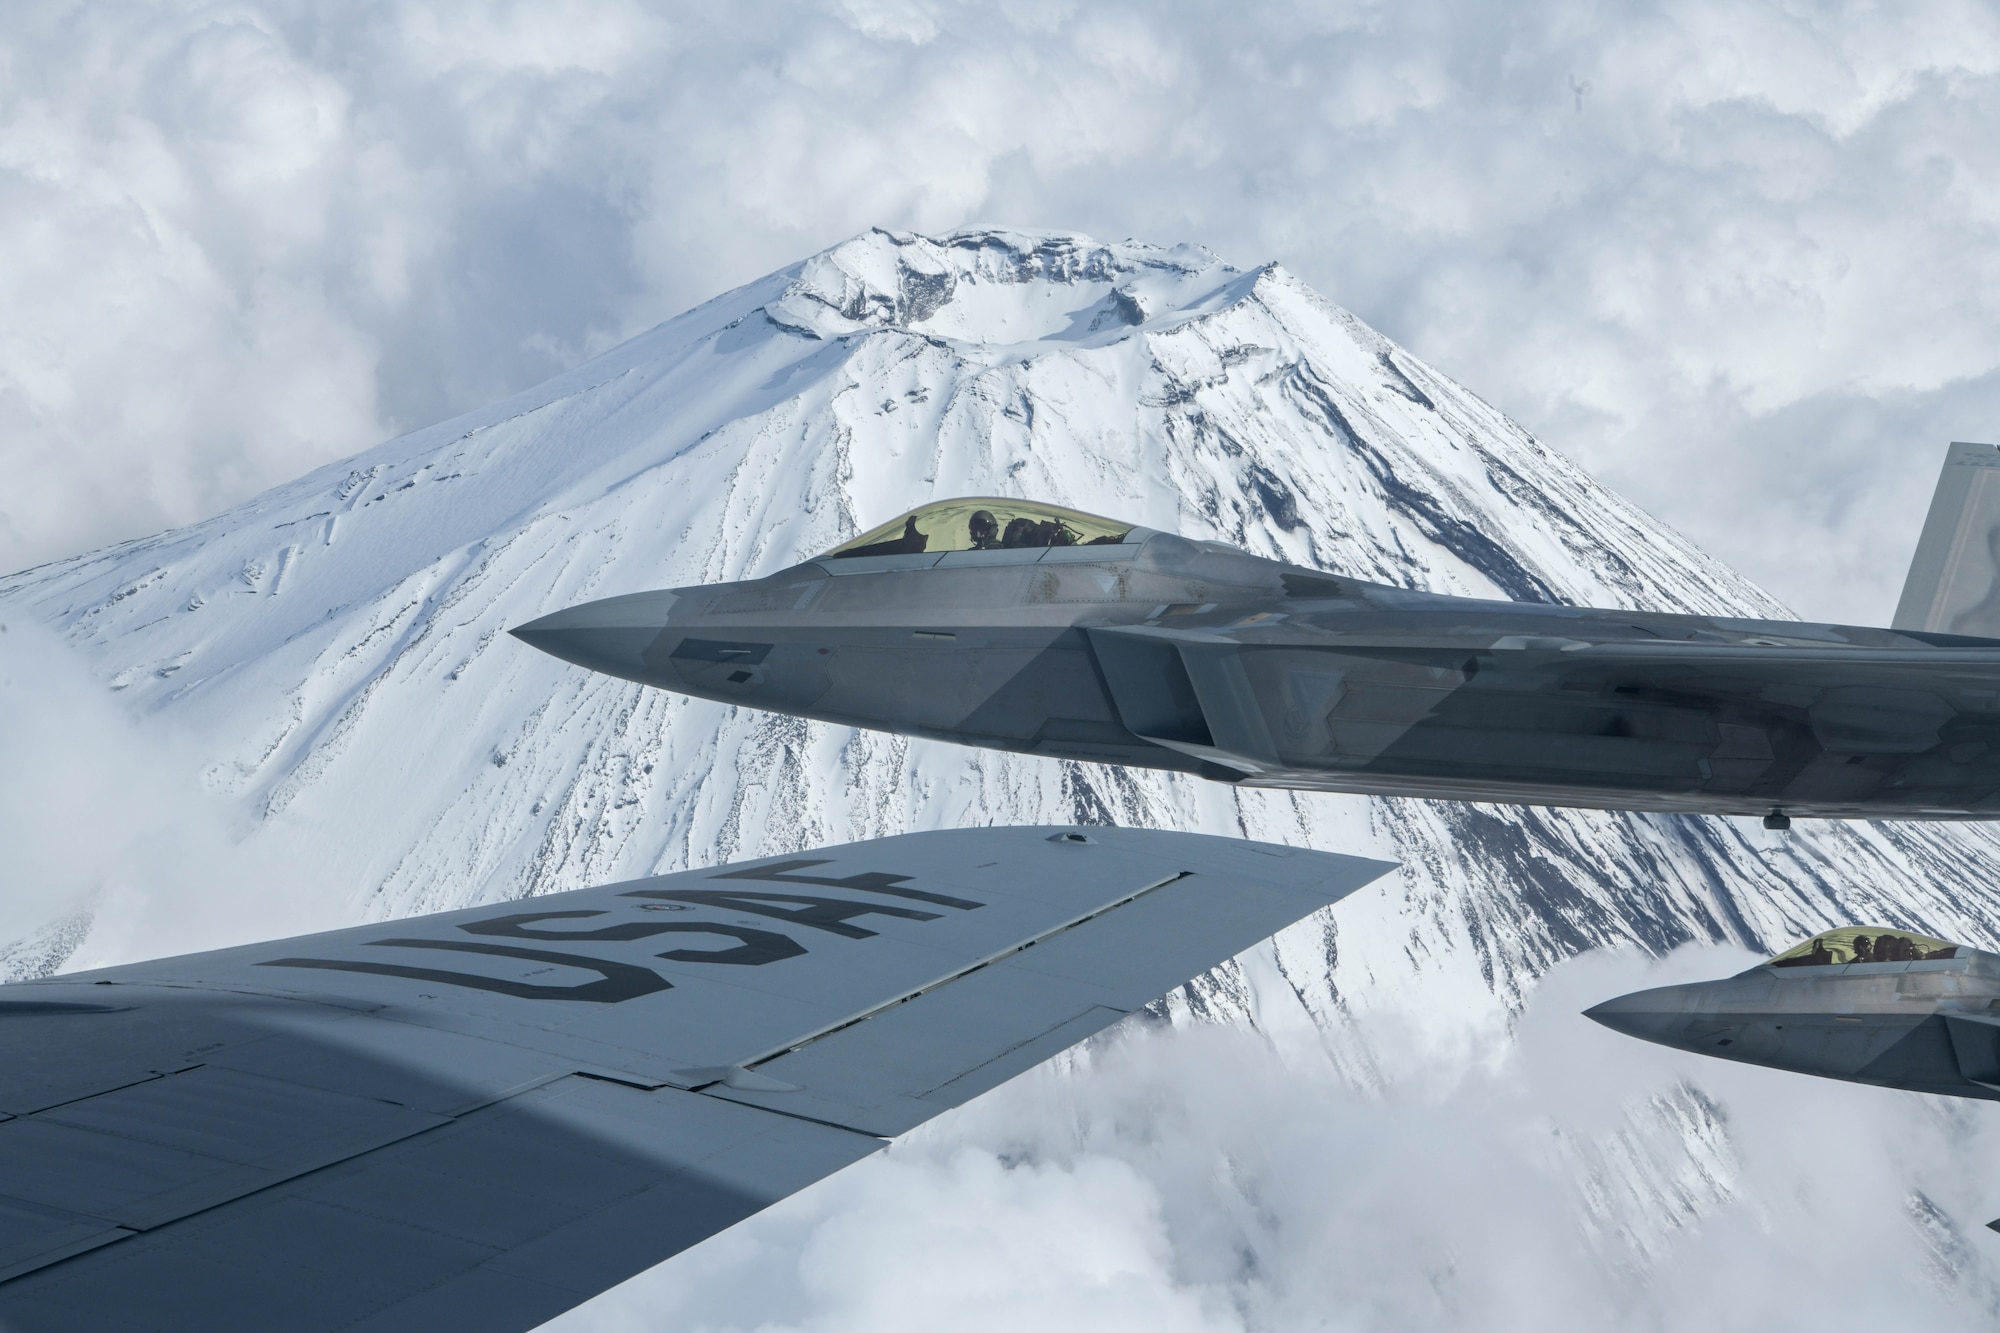 U.S. Air Force Raptors from the 199th Fighter Squadron fly alongside a U.S. Air Force KC-135 Stratotanker from the 909th Air Refueling Squadron during 5th generation fighter training near Mt. Fuji, Japan, April 1, 2021. The F-22 Raptors are currently operating out of Marine Corps Air Station Iwakuni, Japan, to support U.S. Indo-Pacific Command’s dynamic force employment concept. (U.S. Air Force photo by Senior Airman Rebeckah Medeiros)